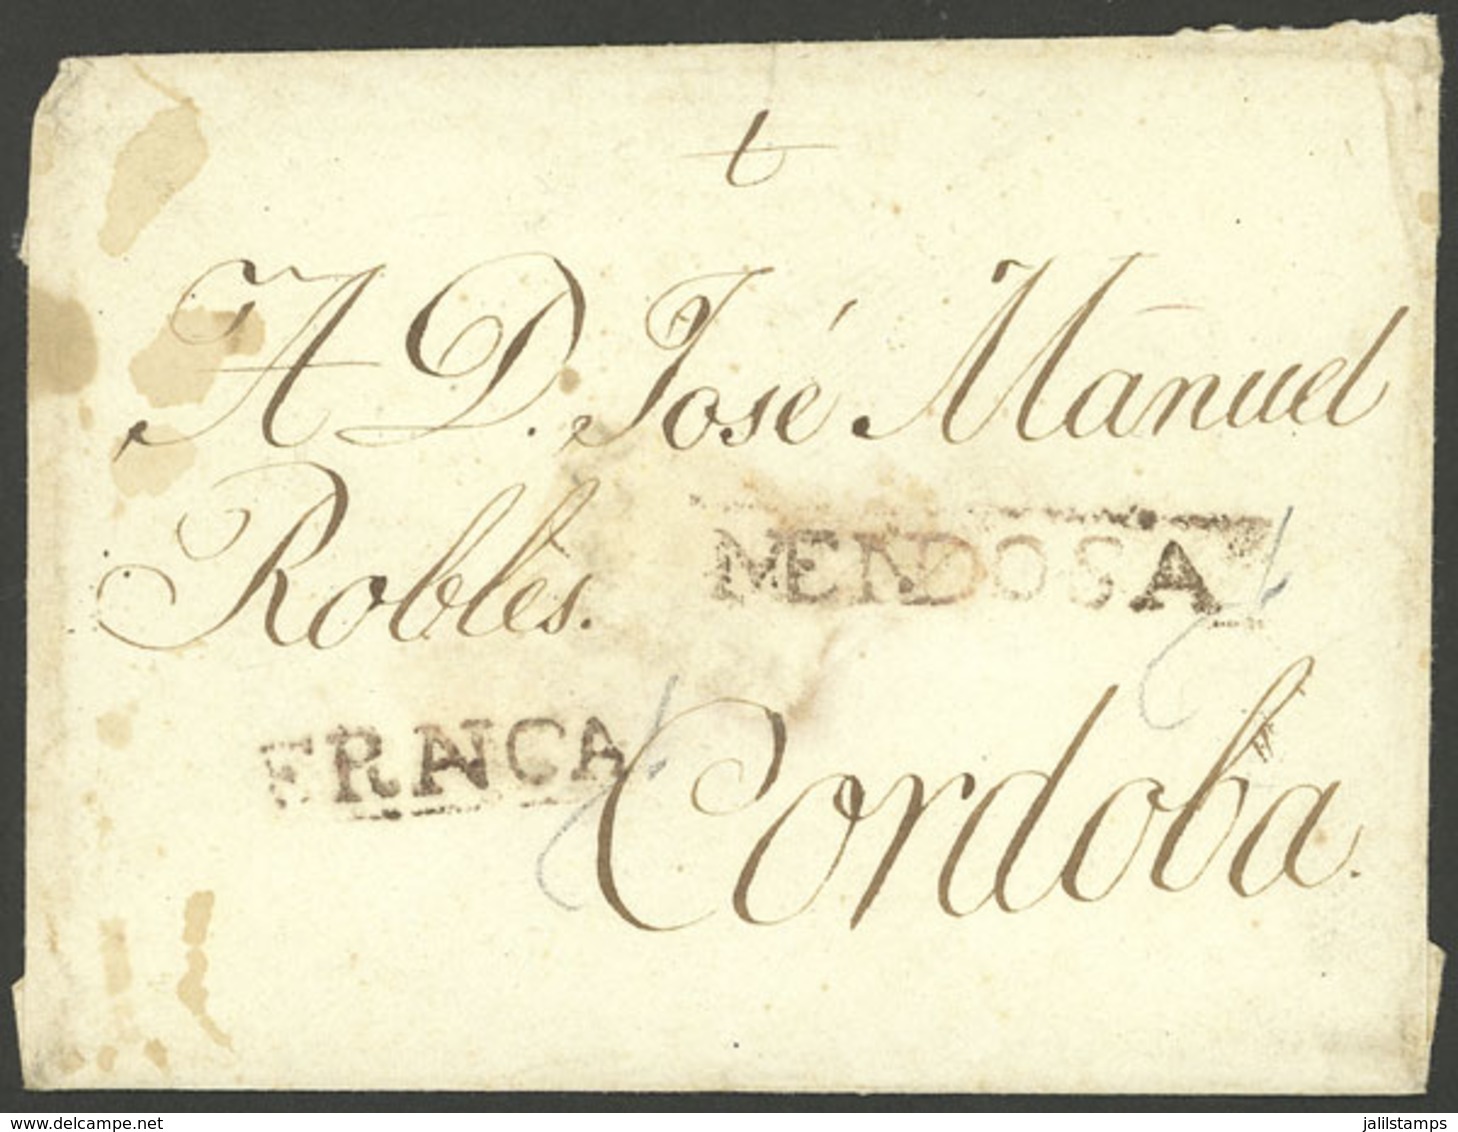 ARGENTINA: Circa 1826, Cover Sent To Córdoba, With Marks "MENDOSA" And "FRANCA" (GJ.MEN 2 And MEN 3A) Both In Rust Red A - Prephilately